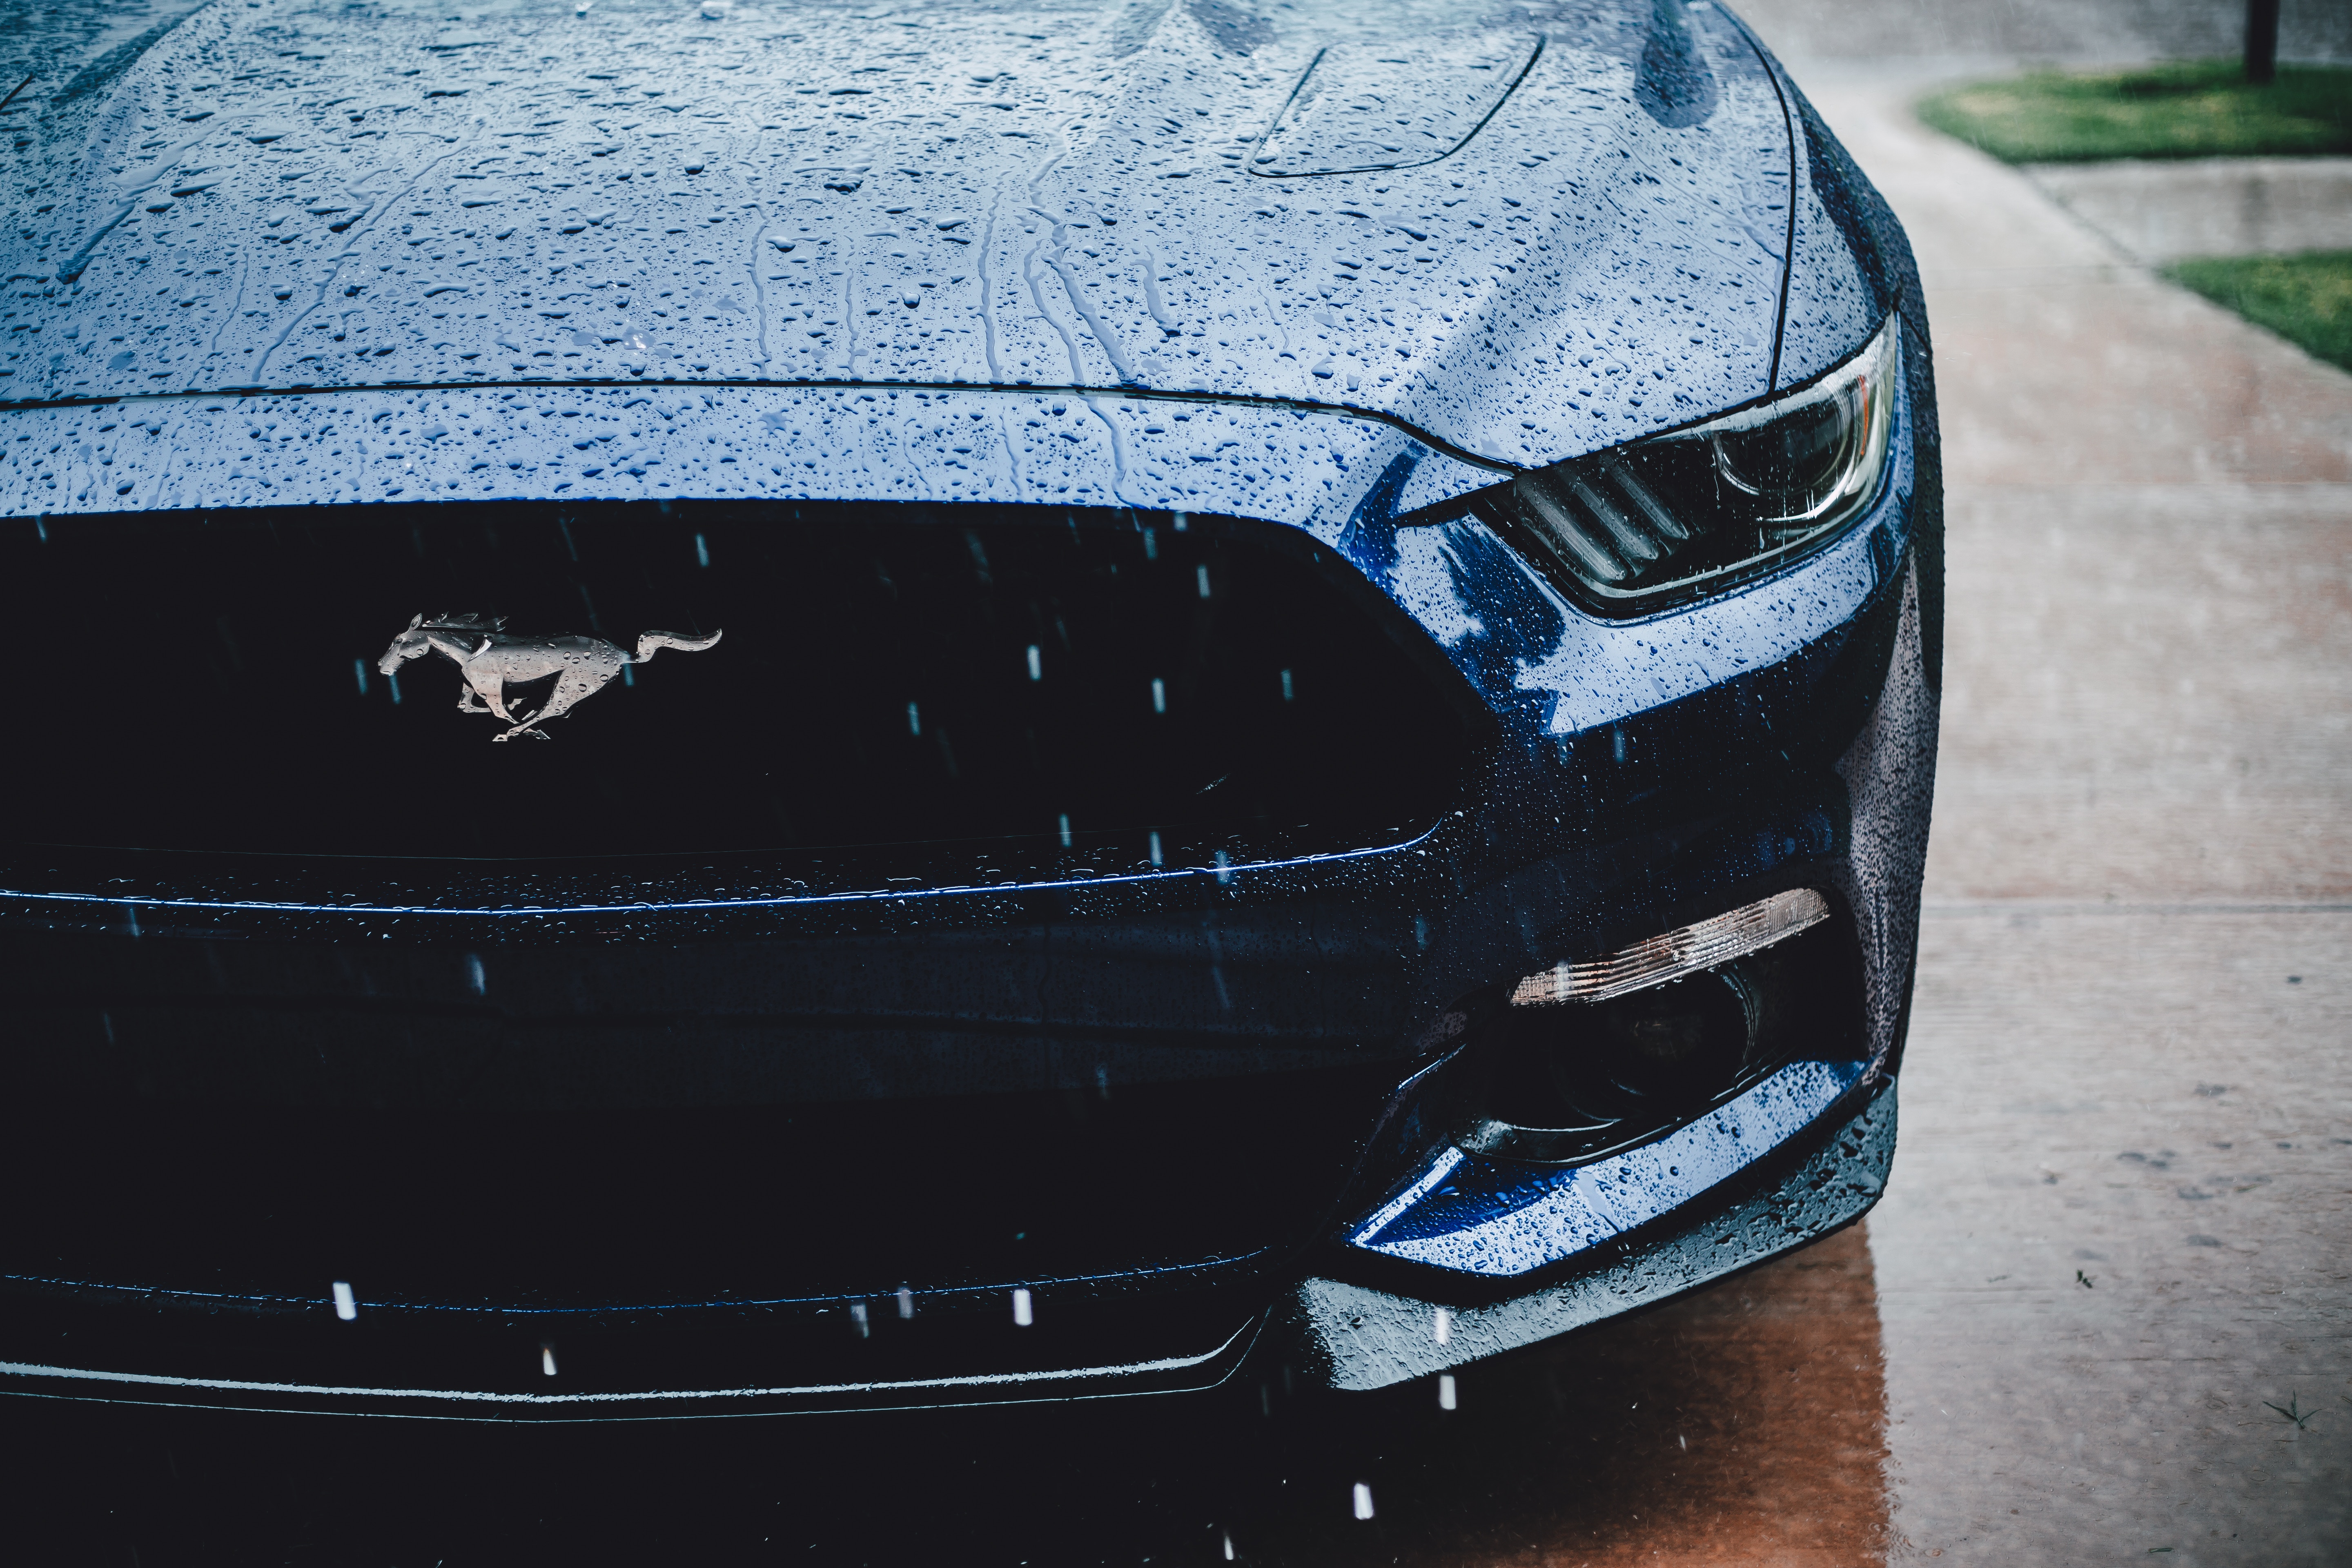 Windows Backgrounds ford mustang, cars, rain, front view, headlight